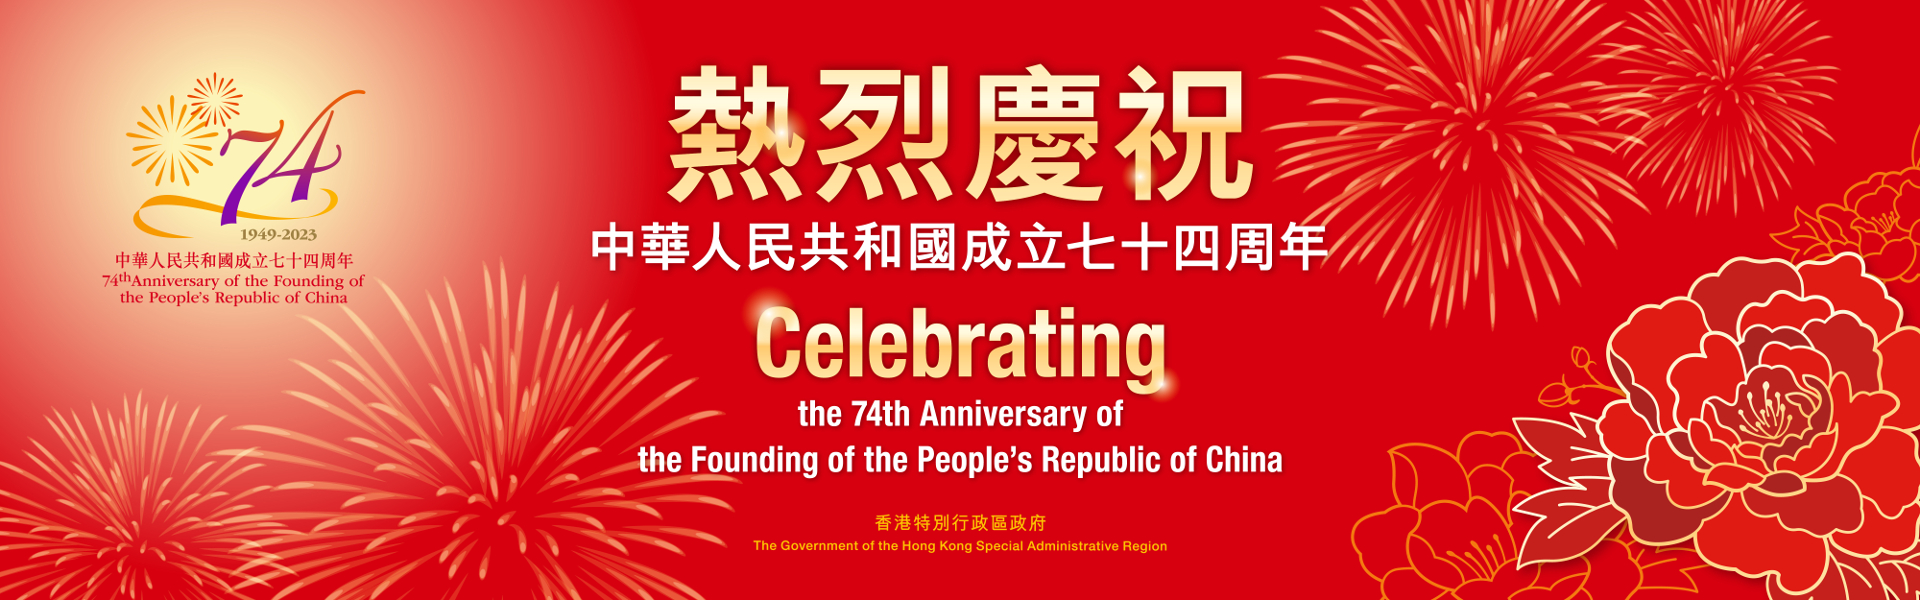 Banner - 74th Anniversary of the Founding of the People's Republic of China